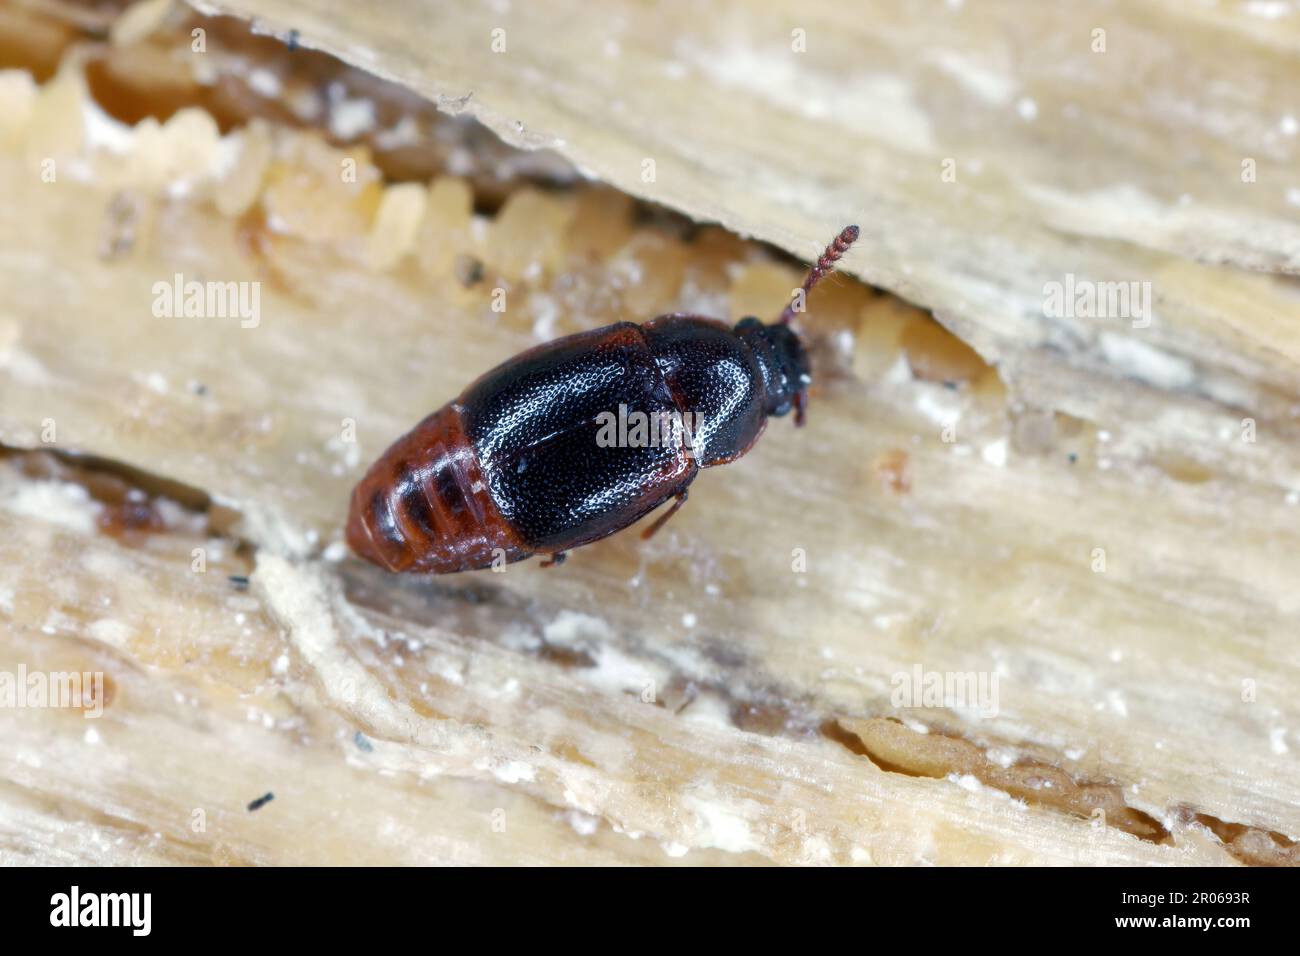 Rove beetle, Acrulia inflata form family Staphylinidae. Insect under the bark of a tree. Stock Photo